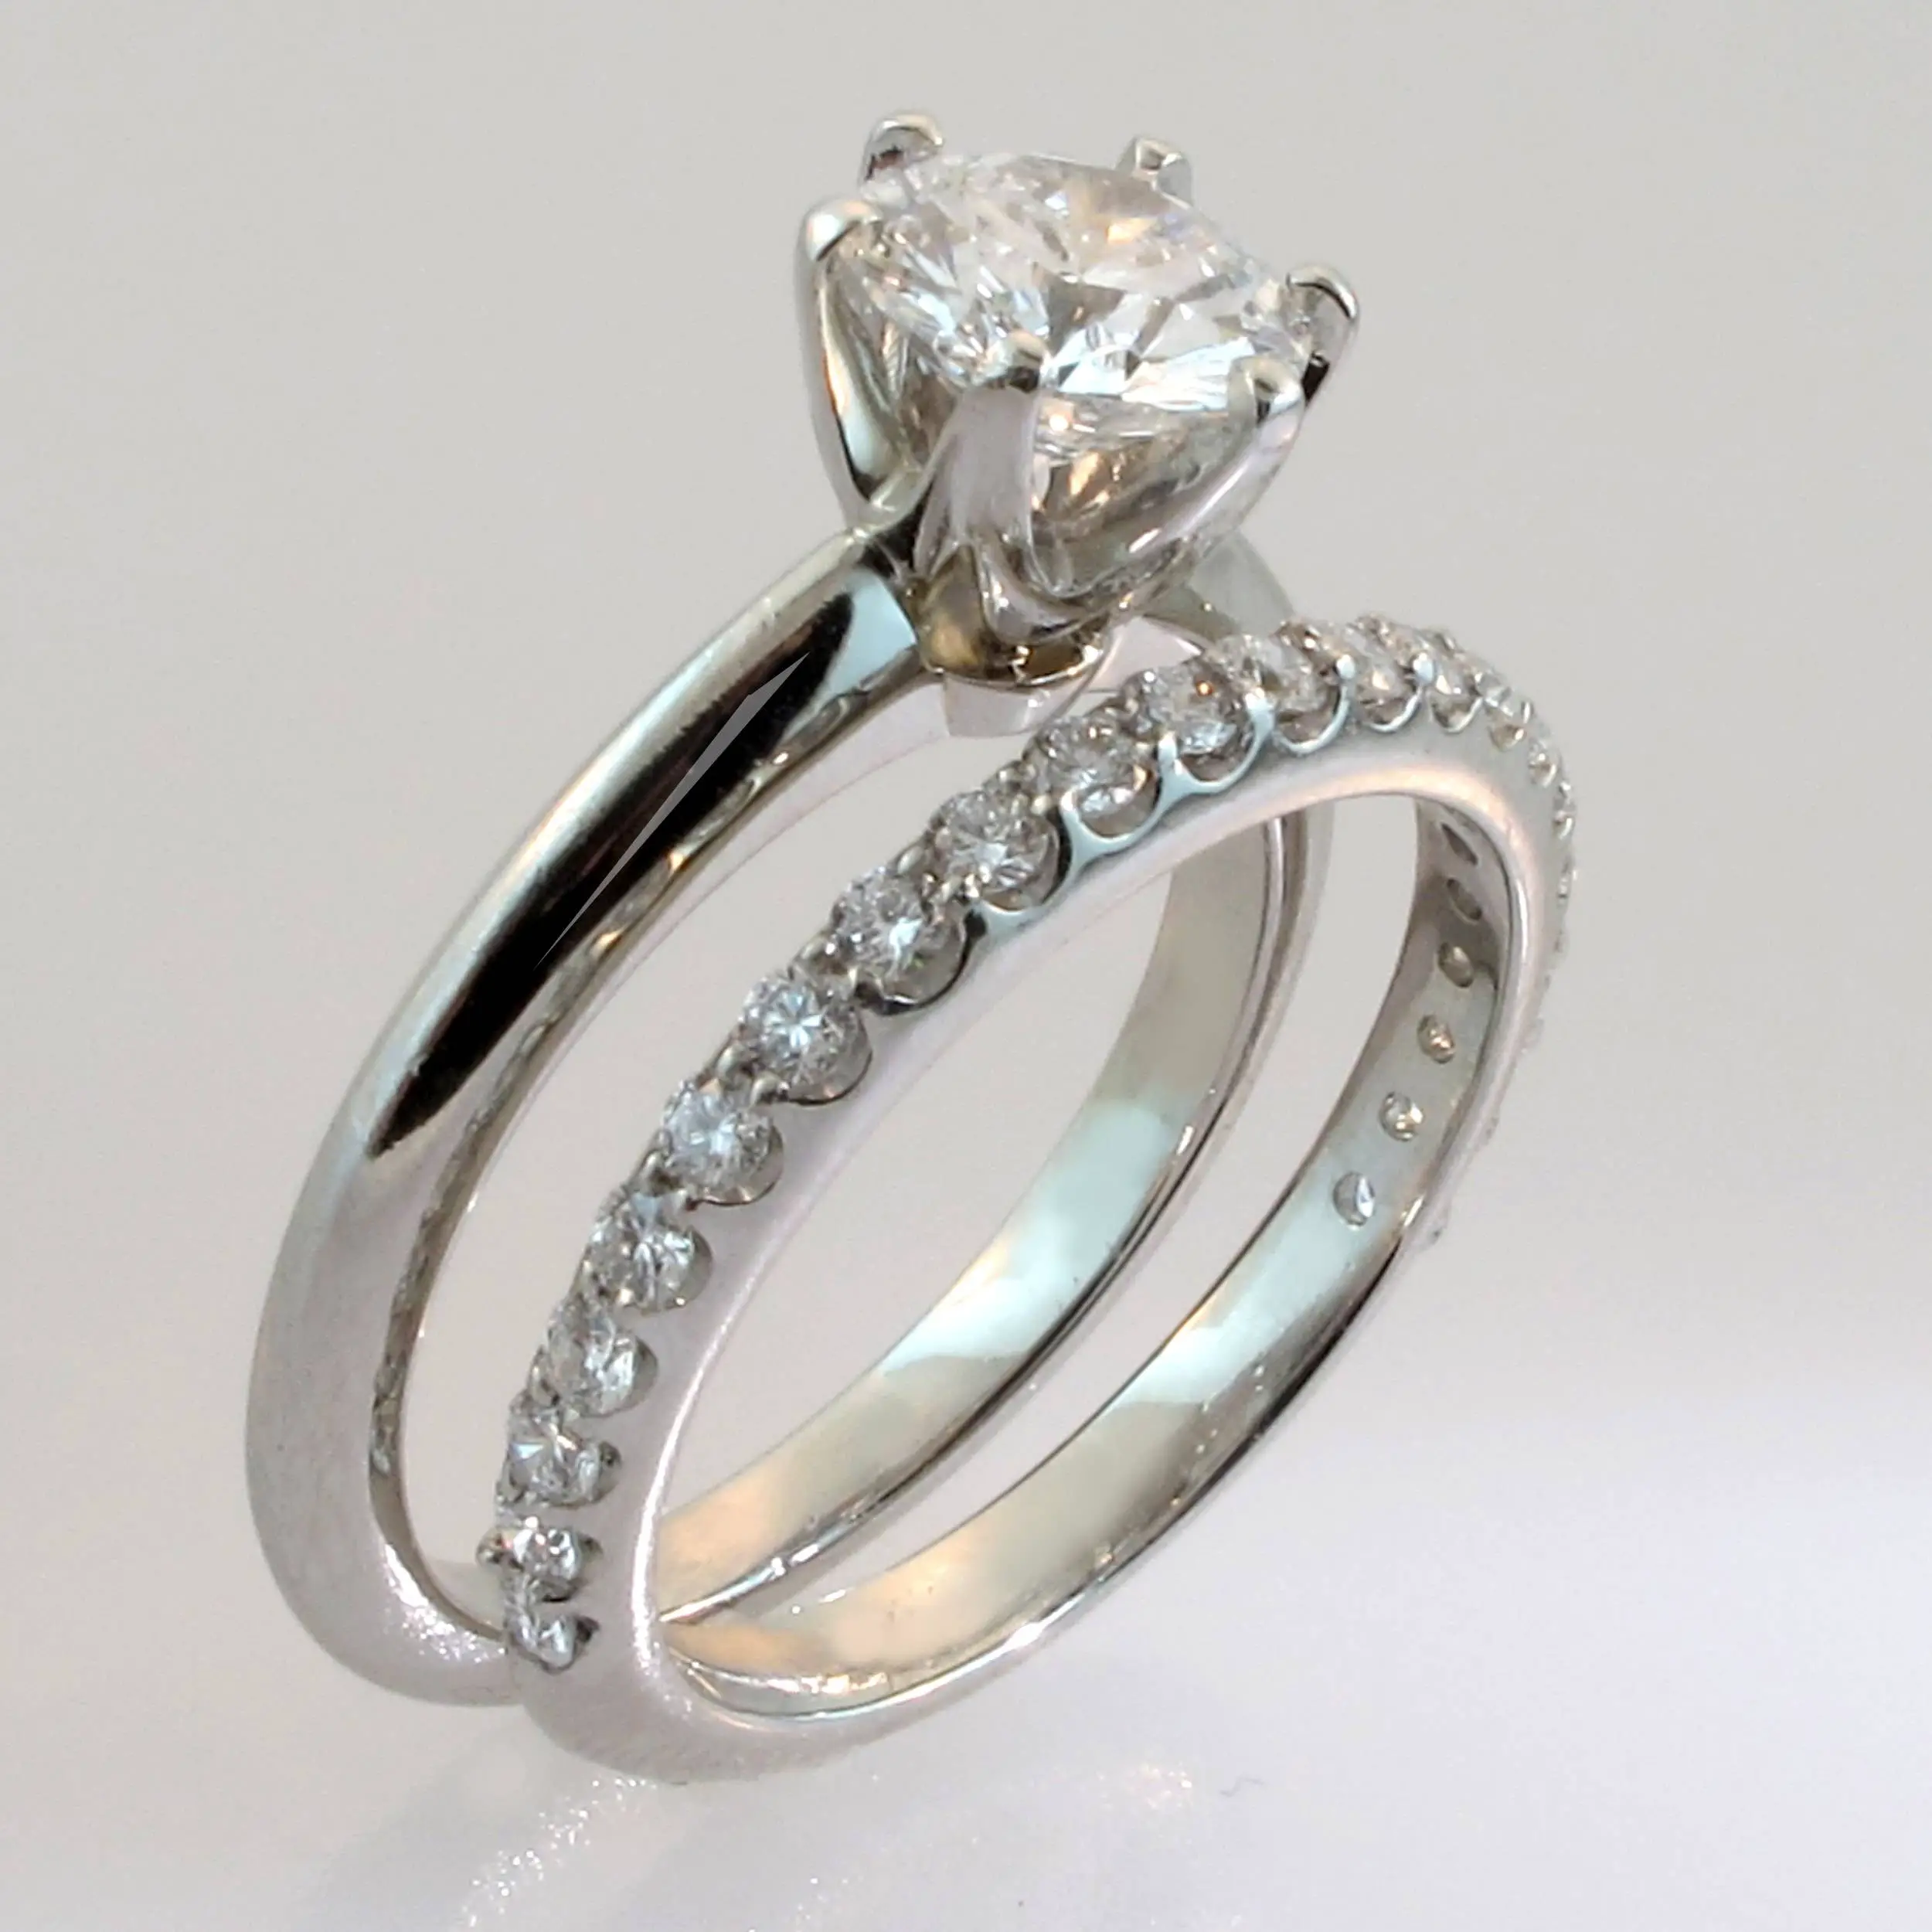 15 Collection of Inexpensive Diamond Wedding Ring Sets